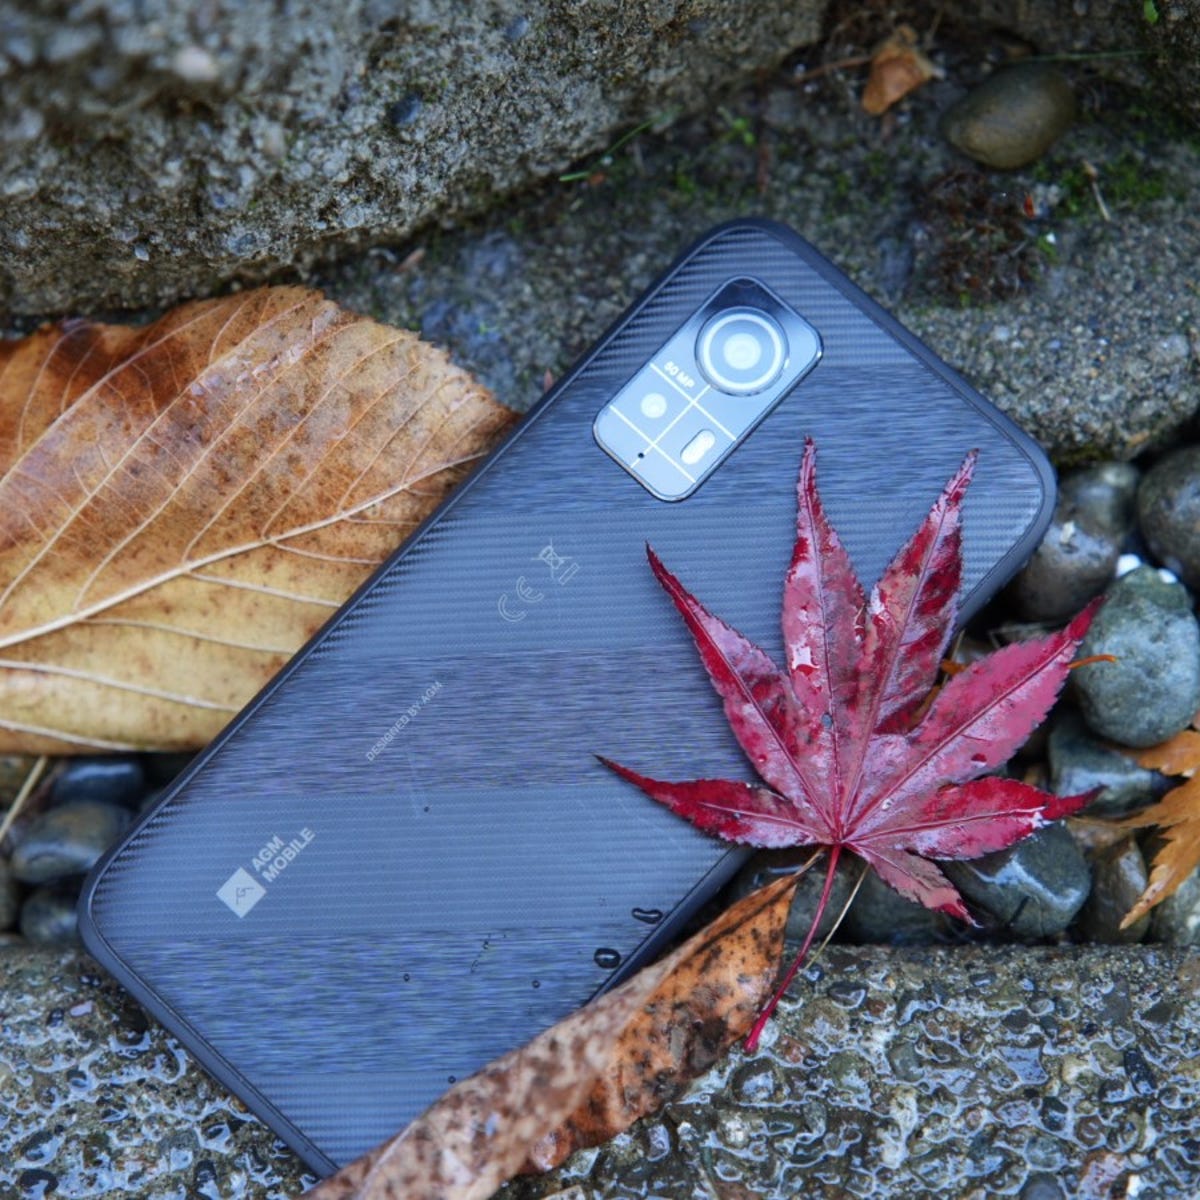 Finally, a rugged Android phone that doesn't look and feel like a brick